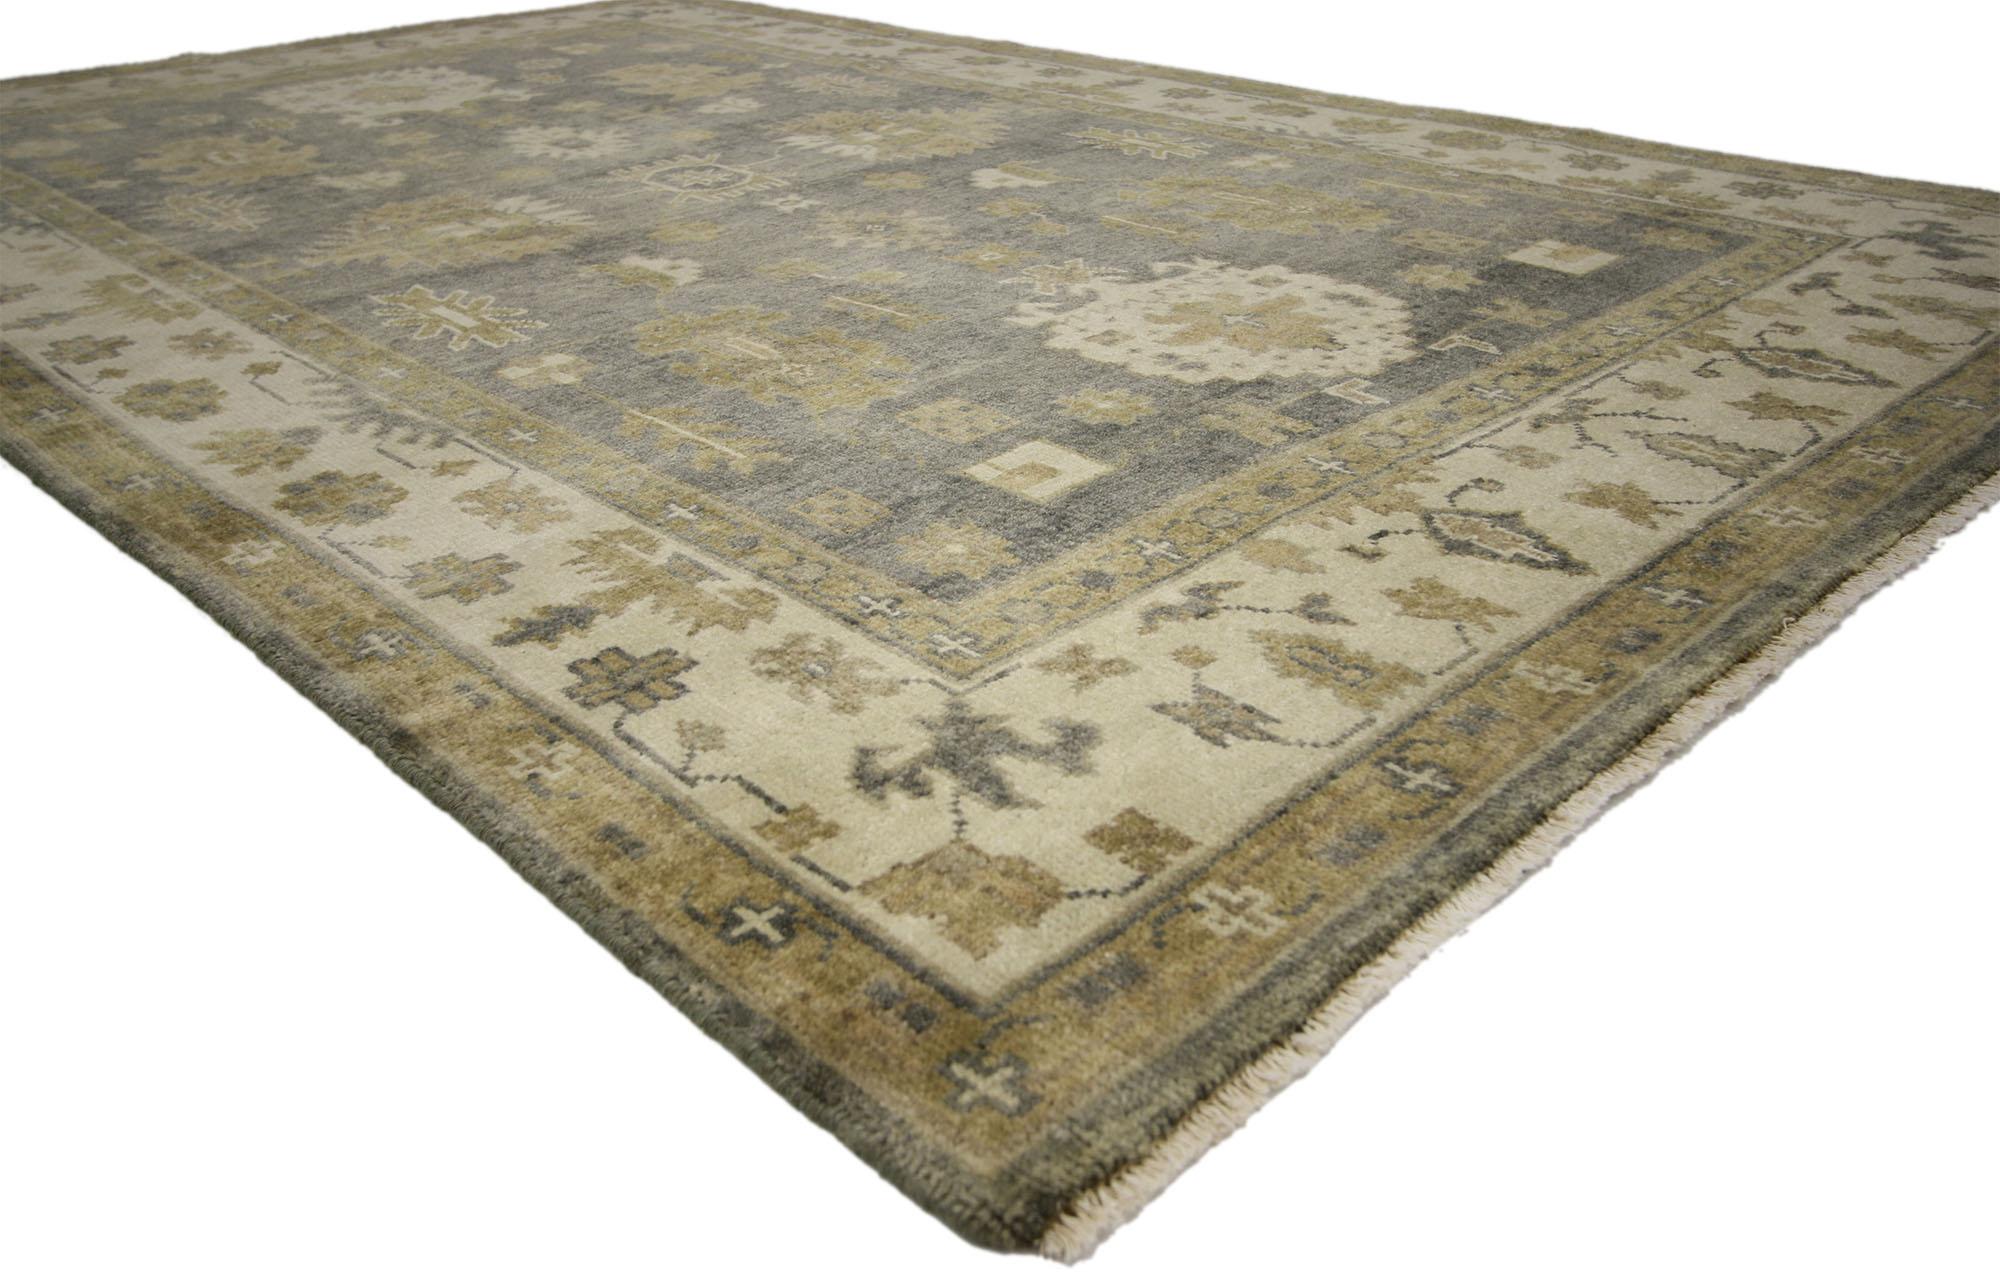 30191 new contemporary Oushak style rug with Transitional design. With its neutral colors and earth-tone colors combined with nostalgic charm, this contemporary Oushak rug creates an inimitable warmth and calming ambiance. Large harshang palmettes,